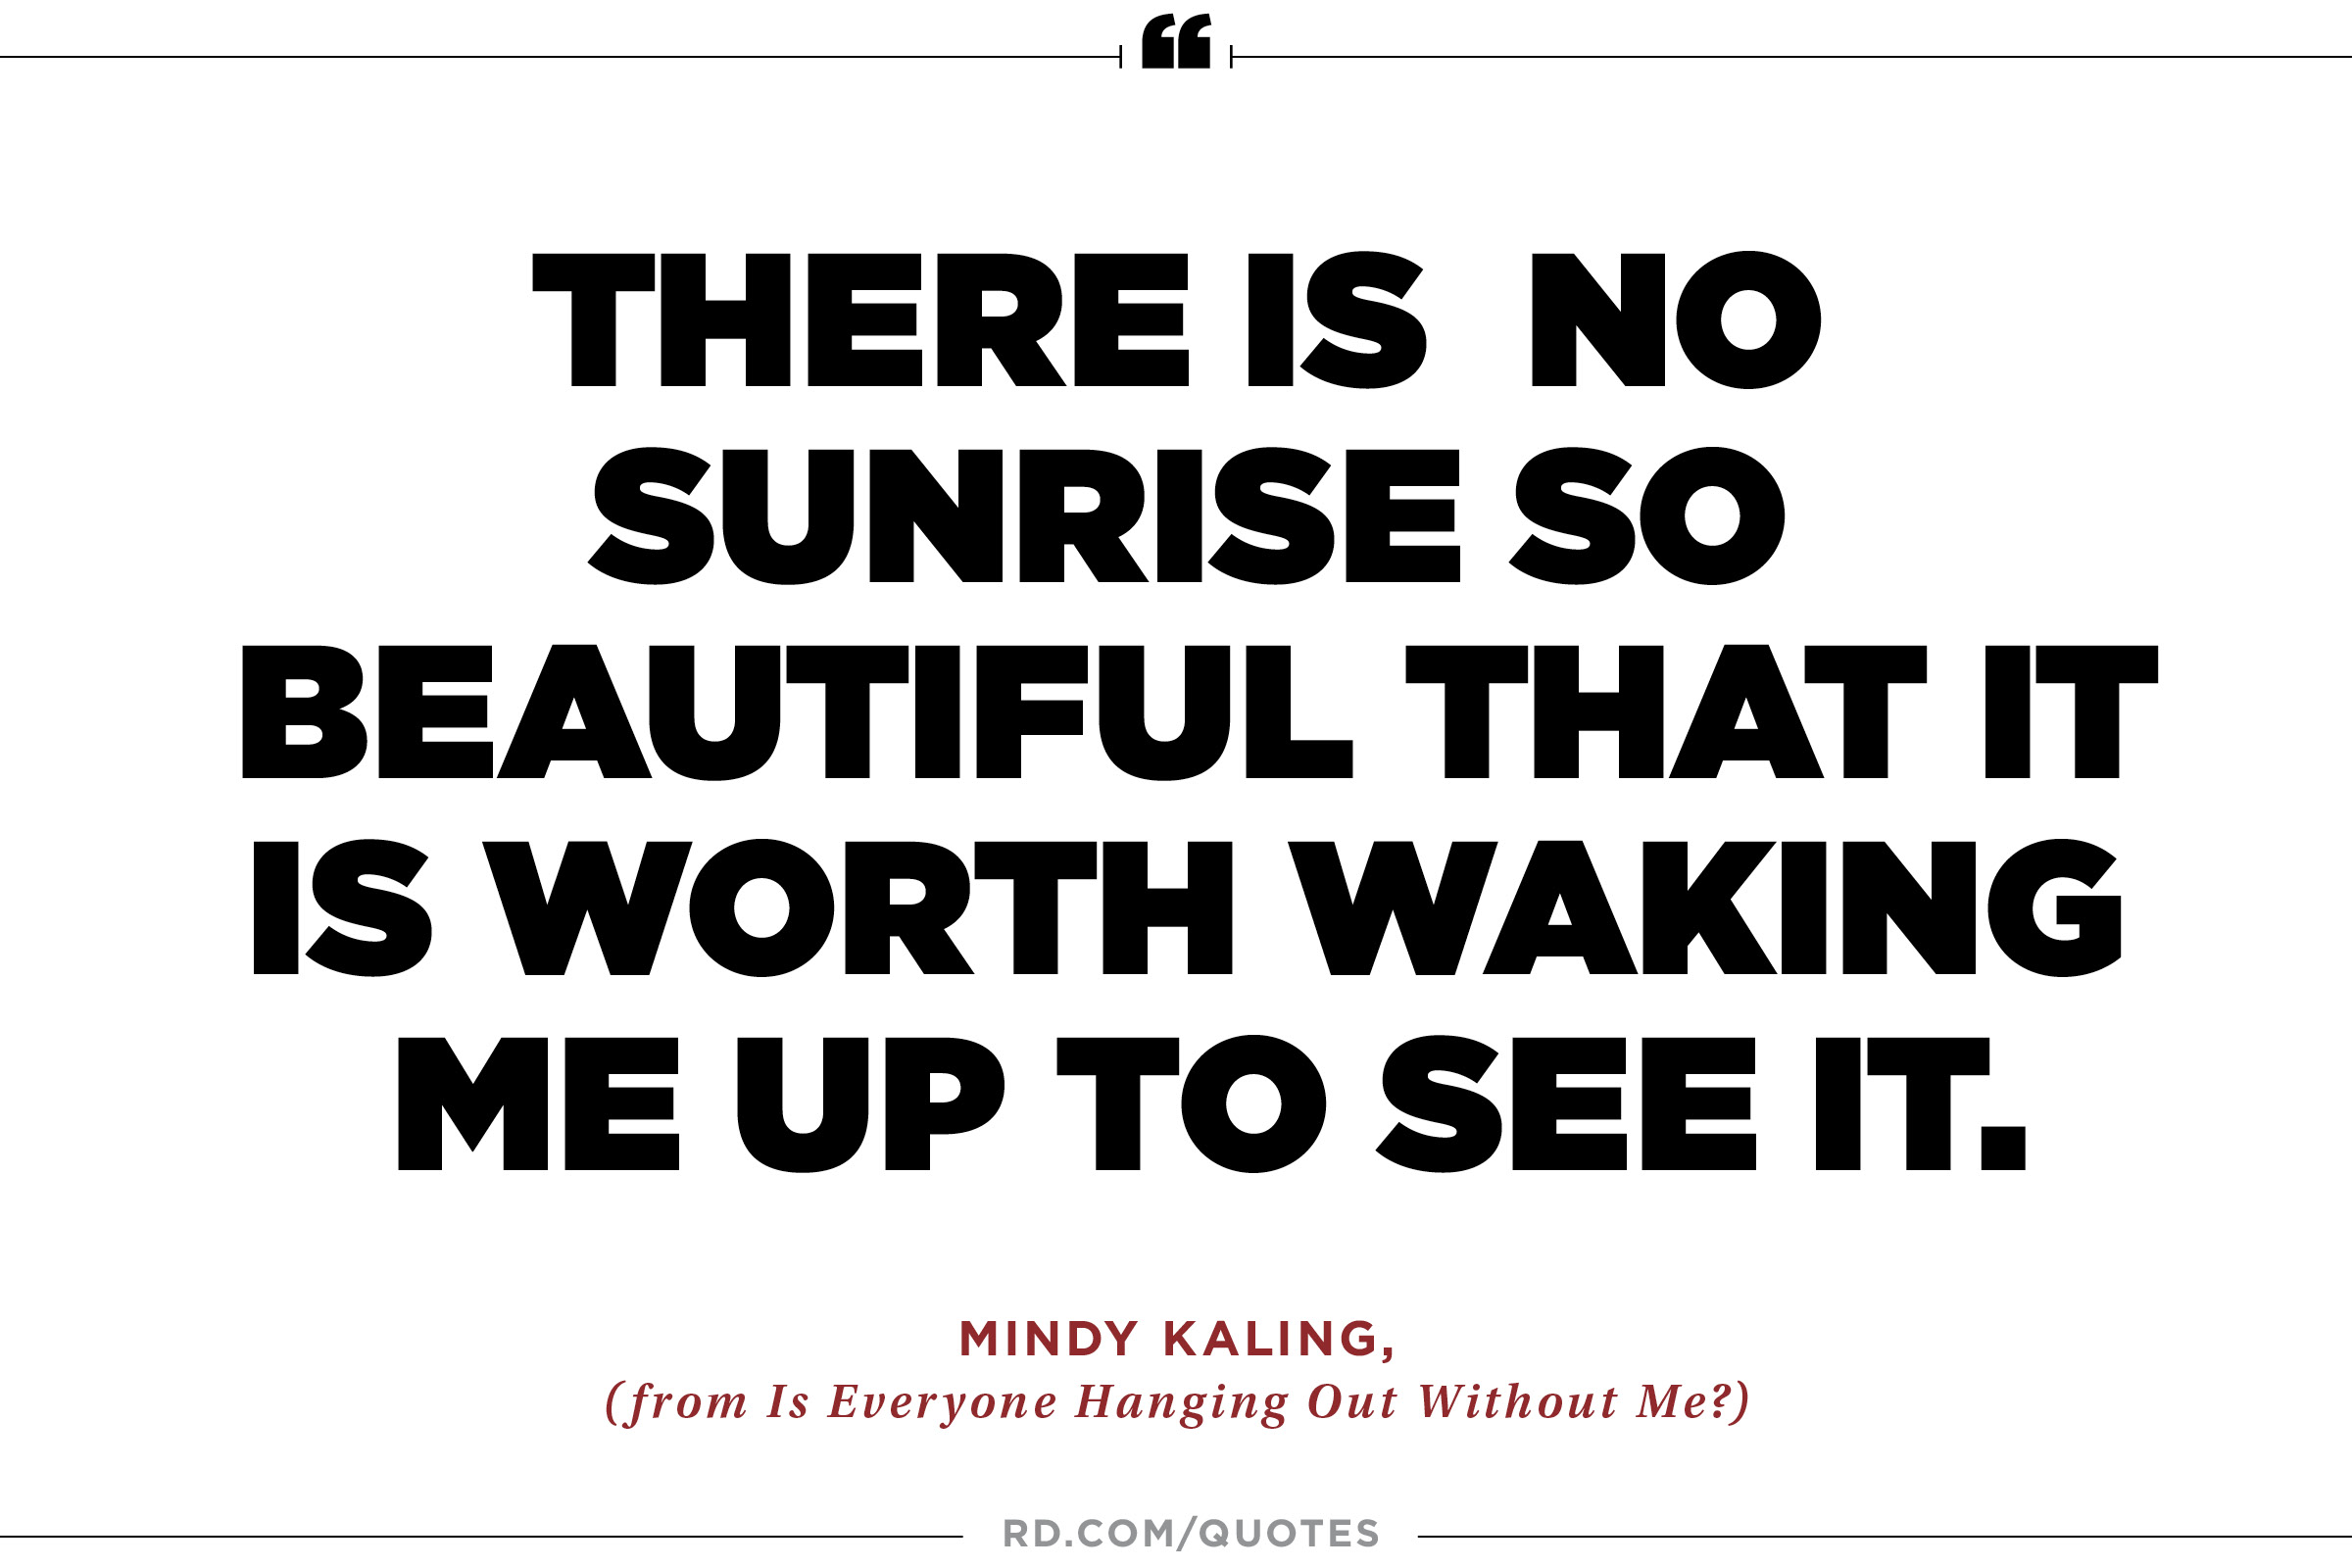 There is no sunrise so beautiful that it is worth waking me up to see it. Mindy Kaling,